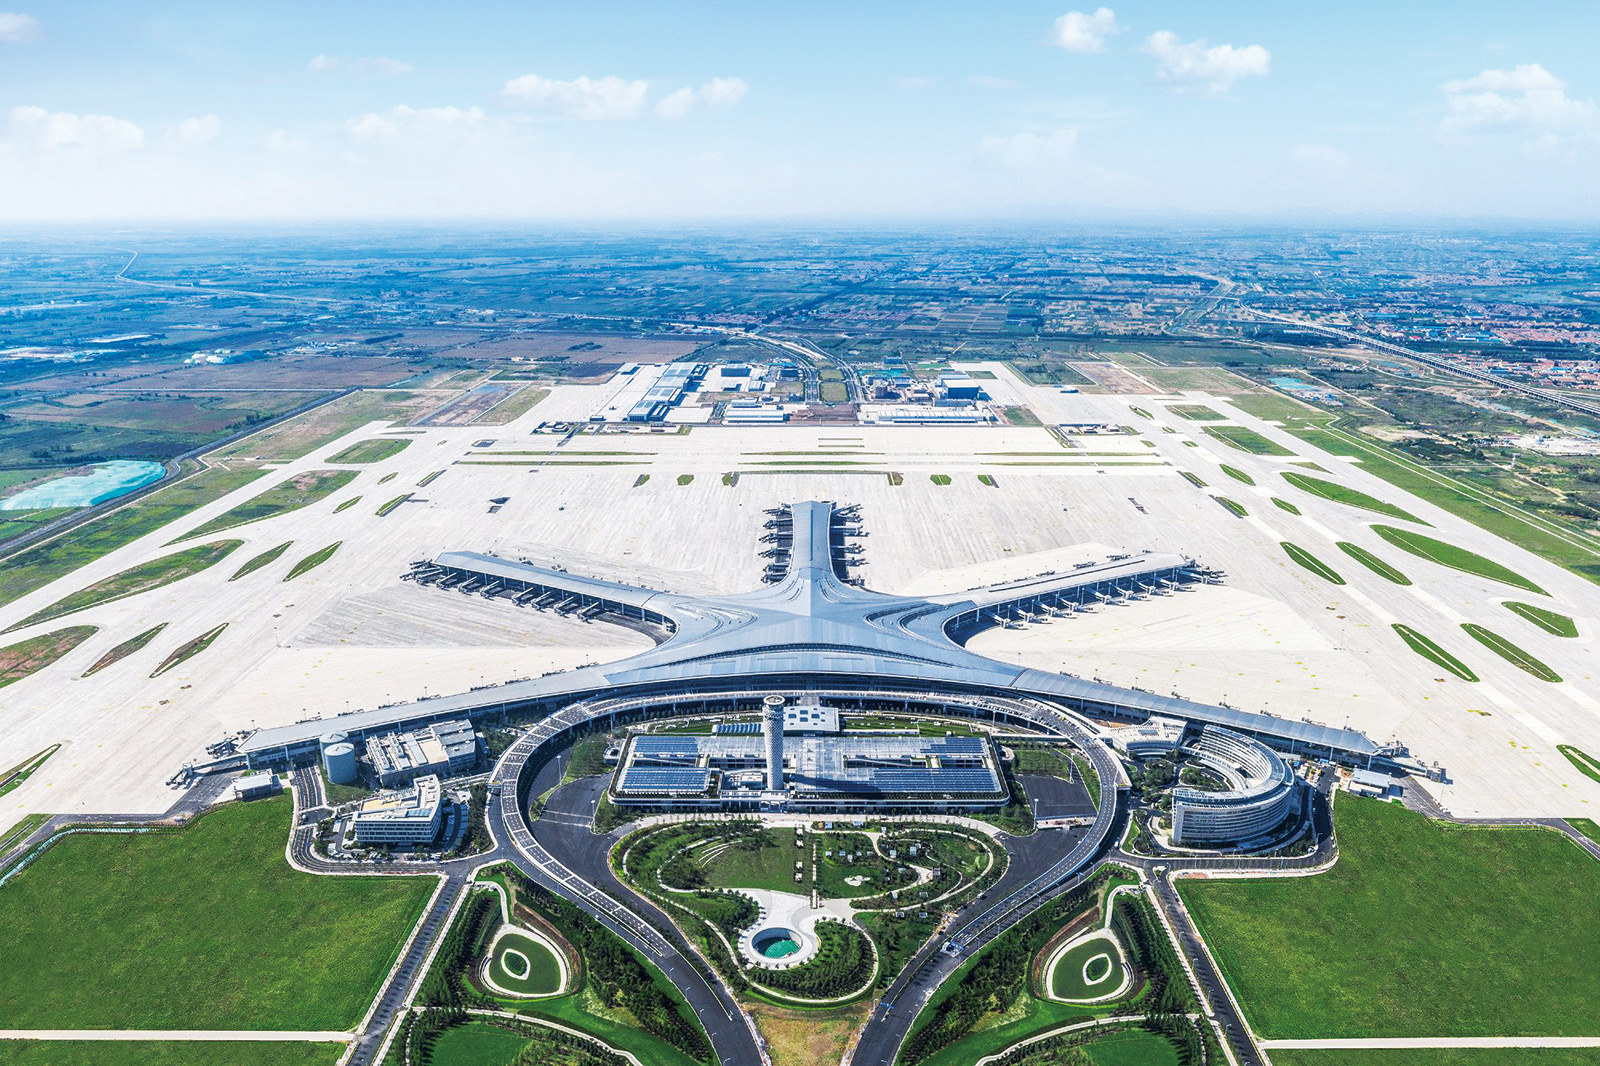 The new airport in Qingdao